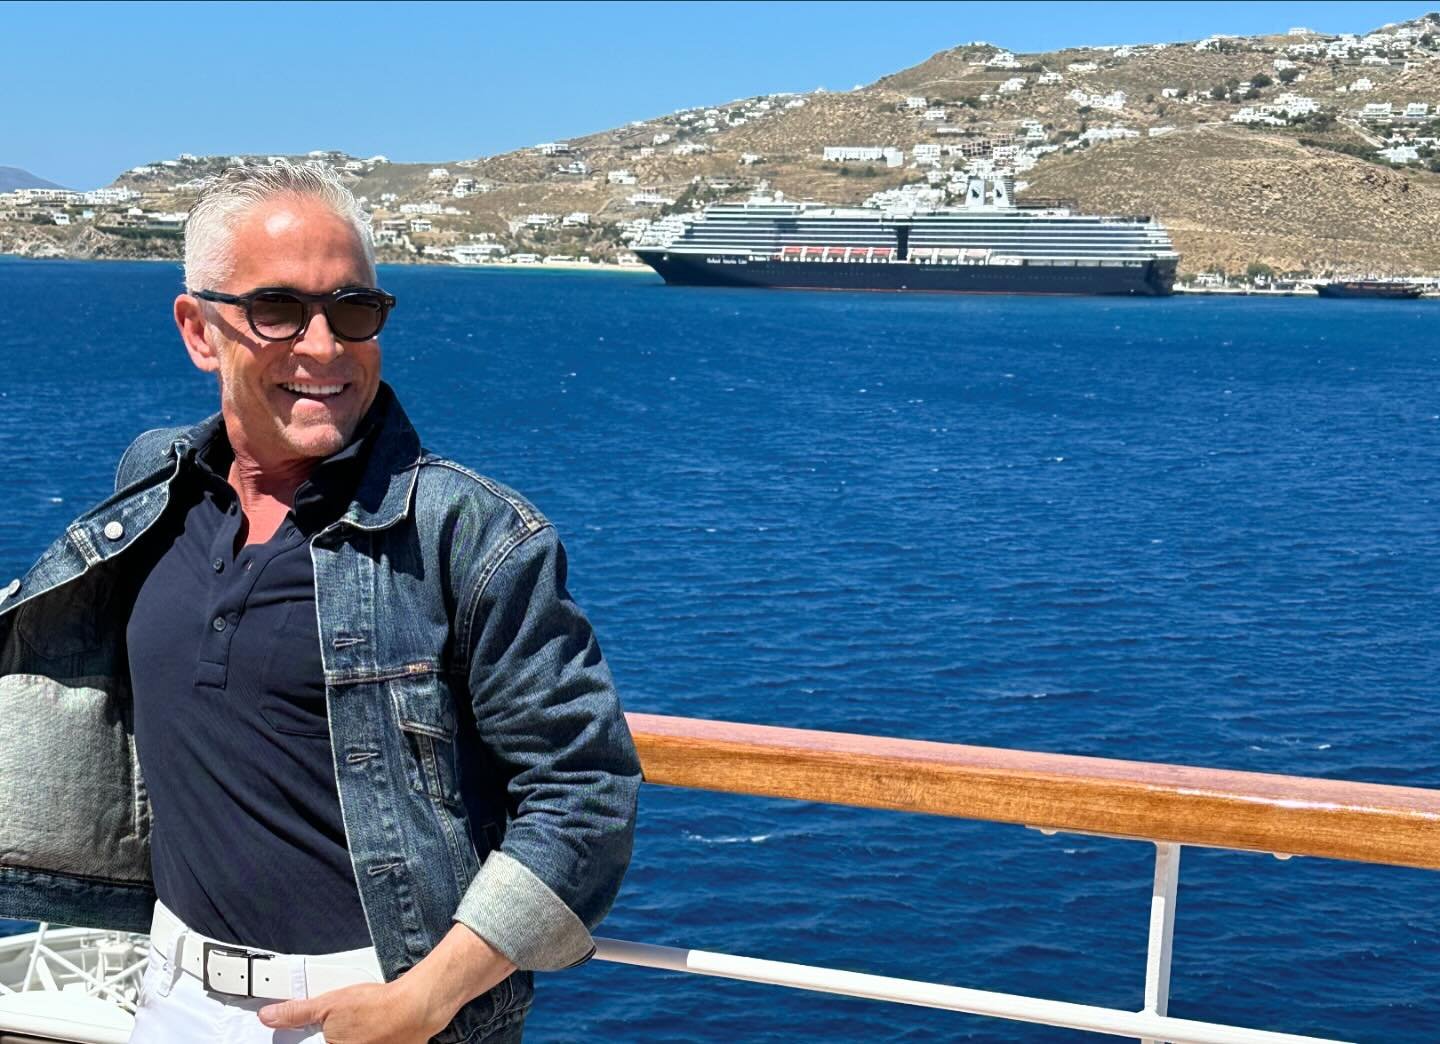 Thank you to ALL our amazing Voyage One guests for a week I&rsquo;ll never forget&hellip;you guys were incredible! Fantastic last day today in #Mykonos Greece. And we are all super excited about welcoming our Voyage Two guests tmrw in Athens. I get t